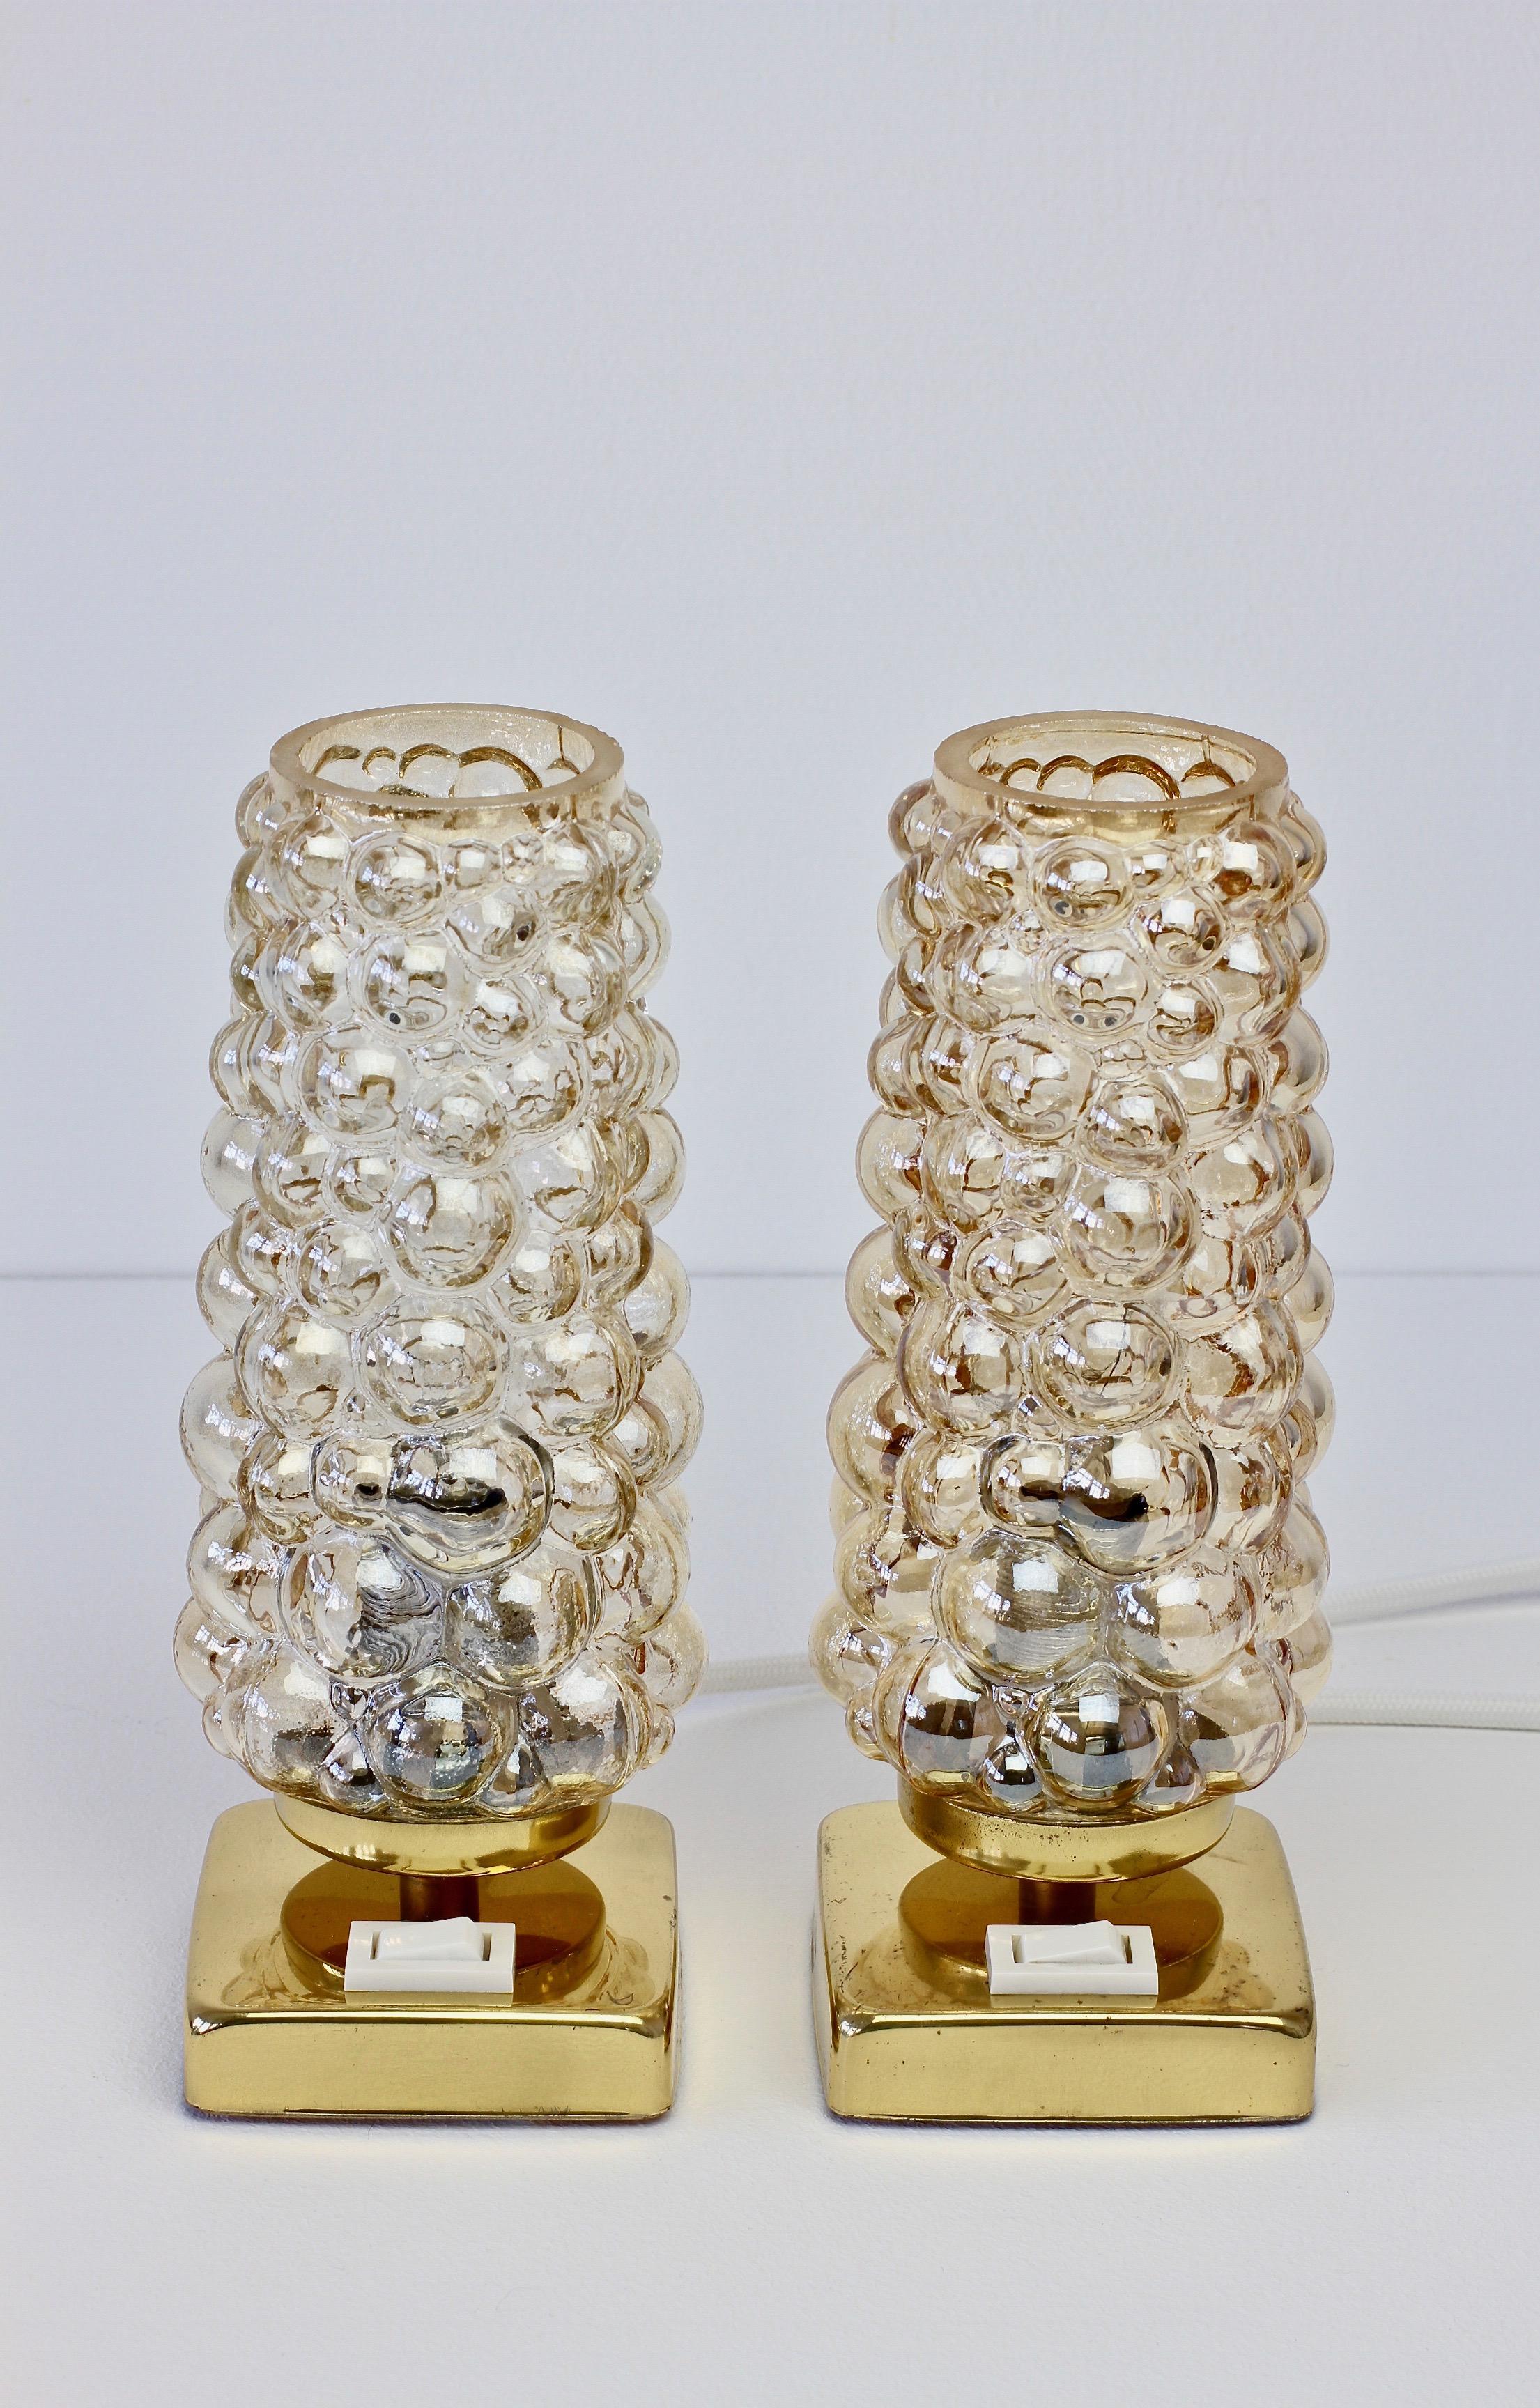 A pair of vintage midcentury amber bubble glass table lamps in the style of Glashütte Limburg by Teka Leuchten Germany, circa 1965. Featuring champagne colored/toned glass shades on brass bases - perfect on a pair of bedside tables or